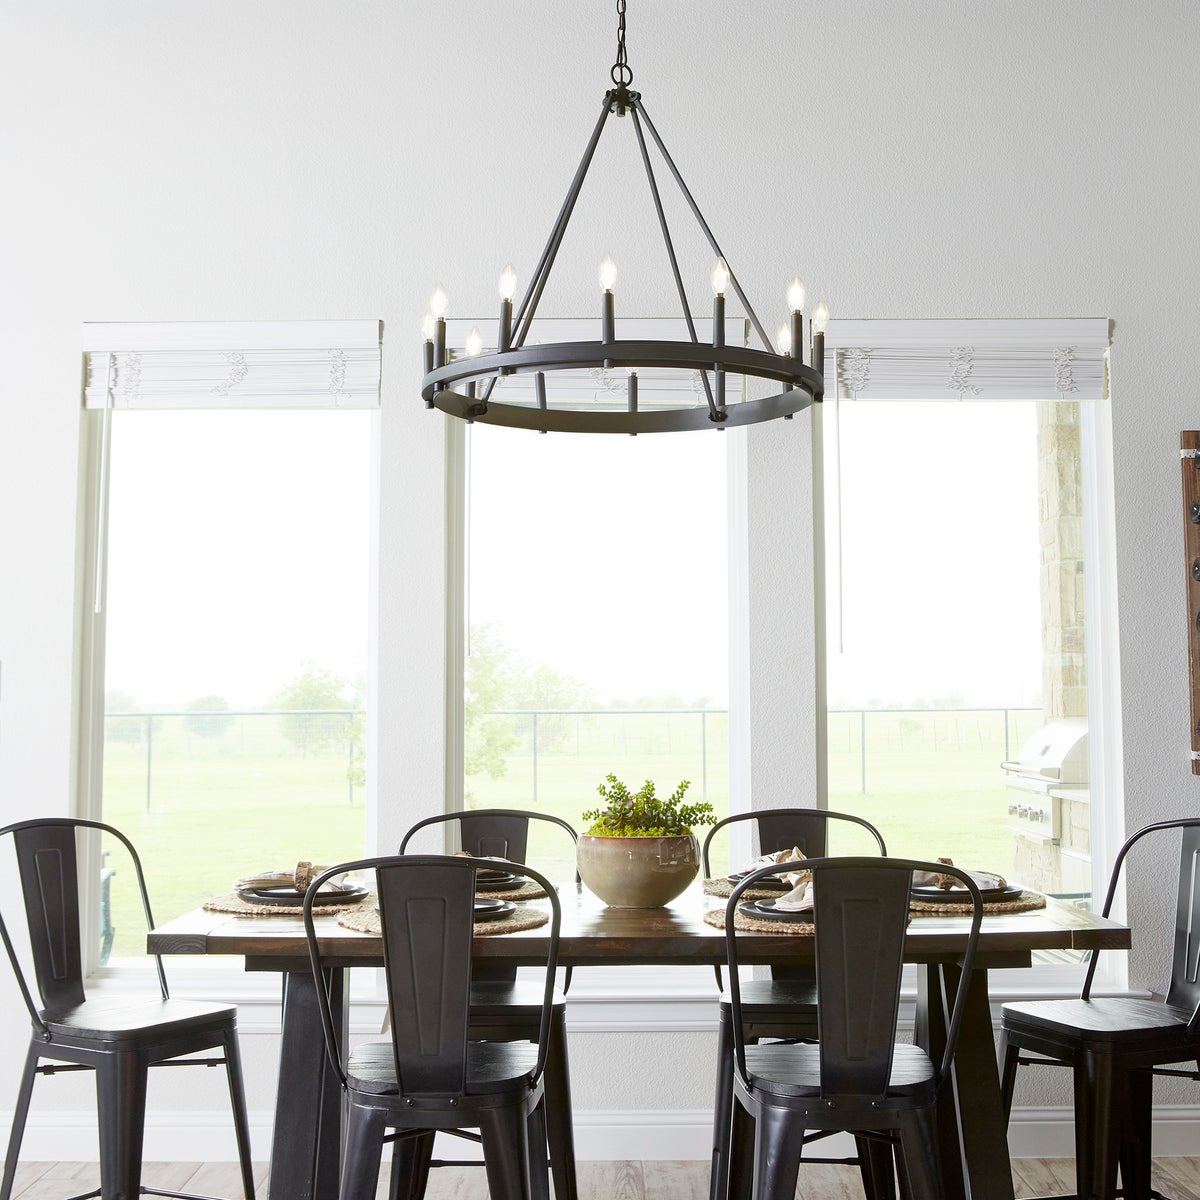 A farmhouse-industrial wagon wheel chandelier with candle sleeves in aged brass, noir, and satin nickel finish options. Elevate your space with this superior fixture from Quorum International. 32"W x 28.25"H. 12 bulbs, 60W, dimmable. UL Listed for dry locations. 2-year warranty.